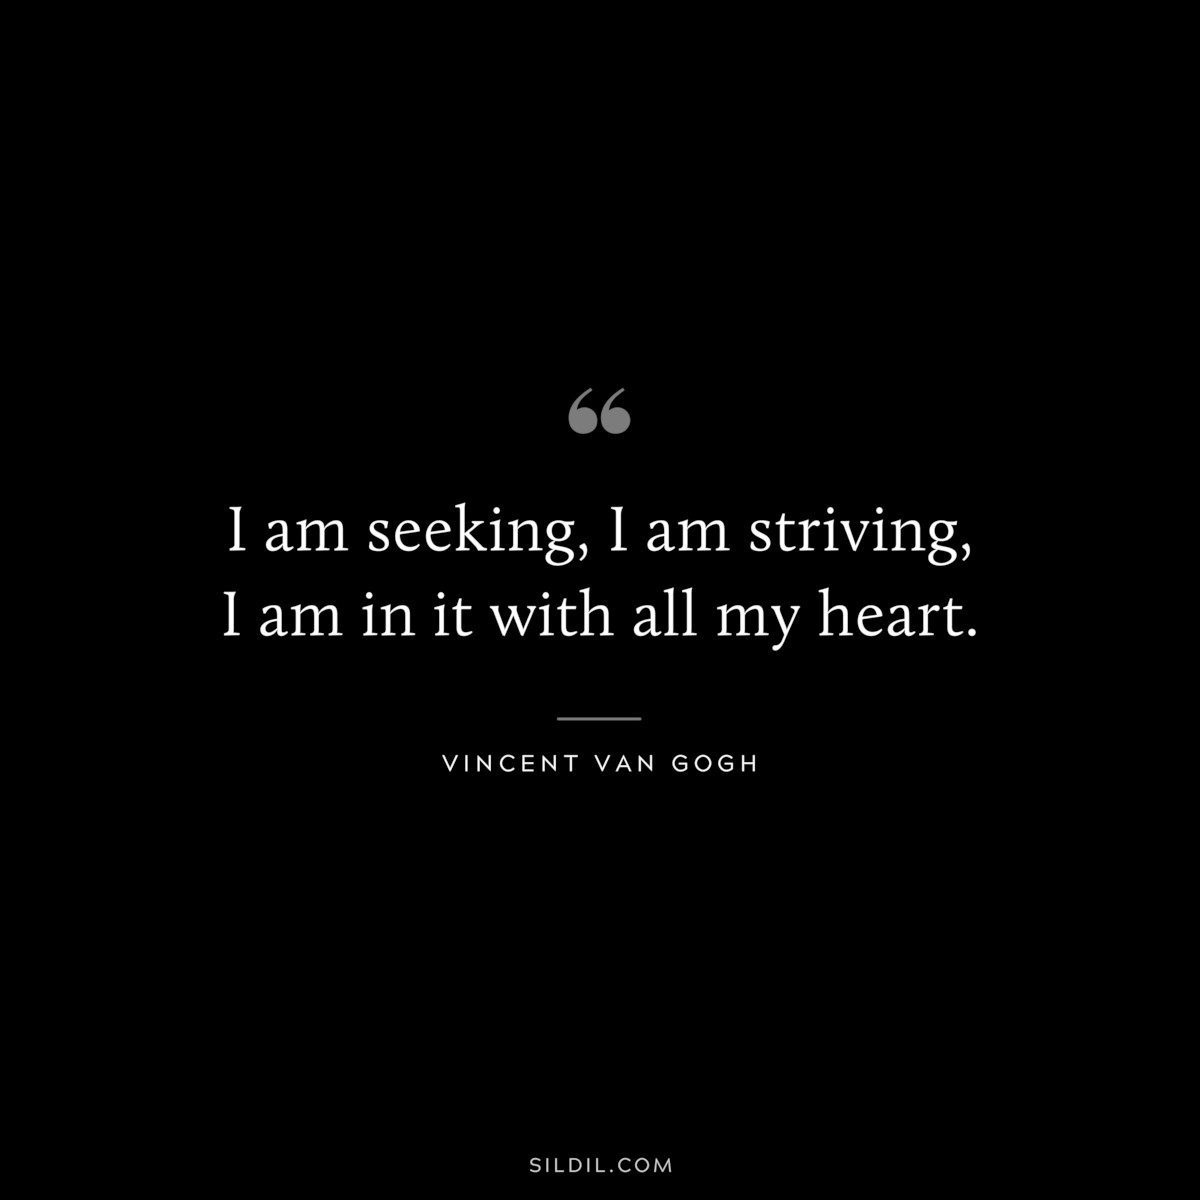 I am seeking, I am striving, I am in it with all my heart. ― Vincent van Gogh